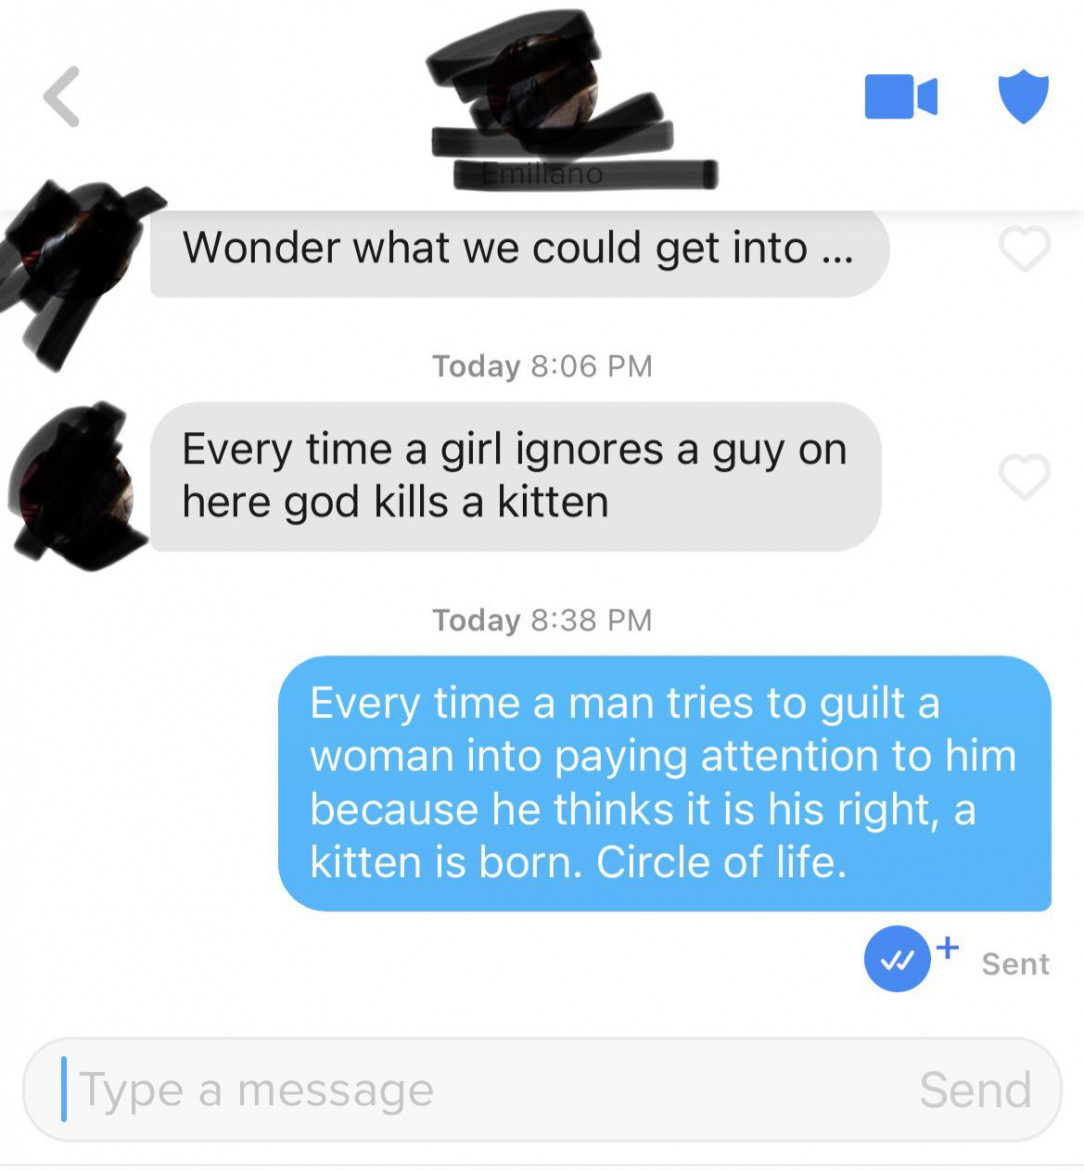 Does the “god kills a kitten” line ever work?